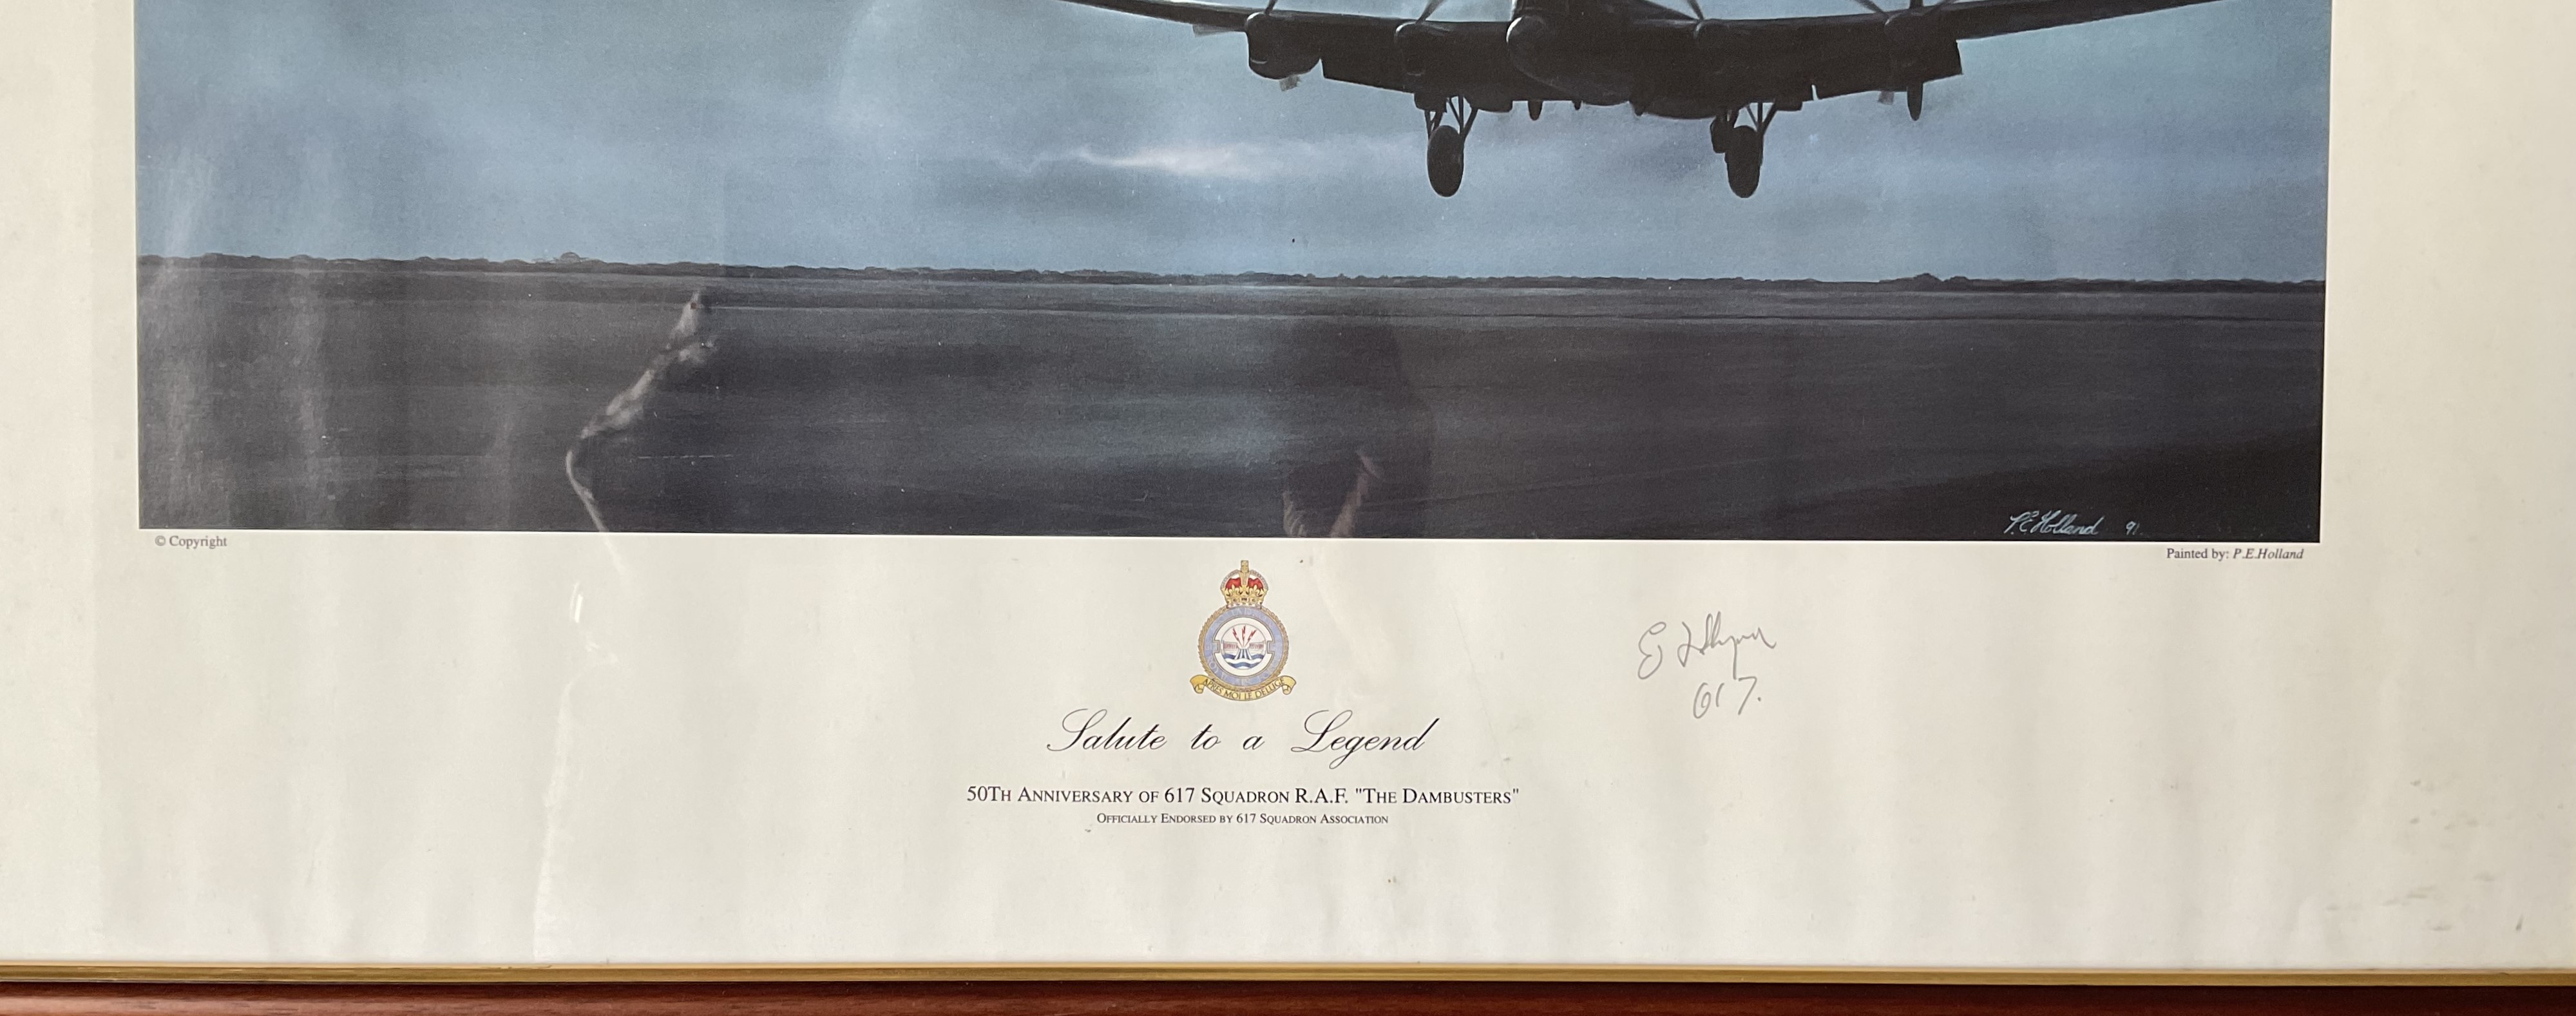 Salute to a Legend - 50th Anniversary of 617 Squadron R.A.F. "The Dambusters" by P E Holland - Image 2 of 2